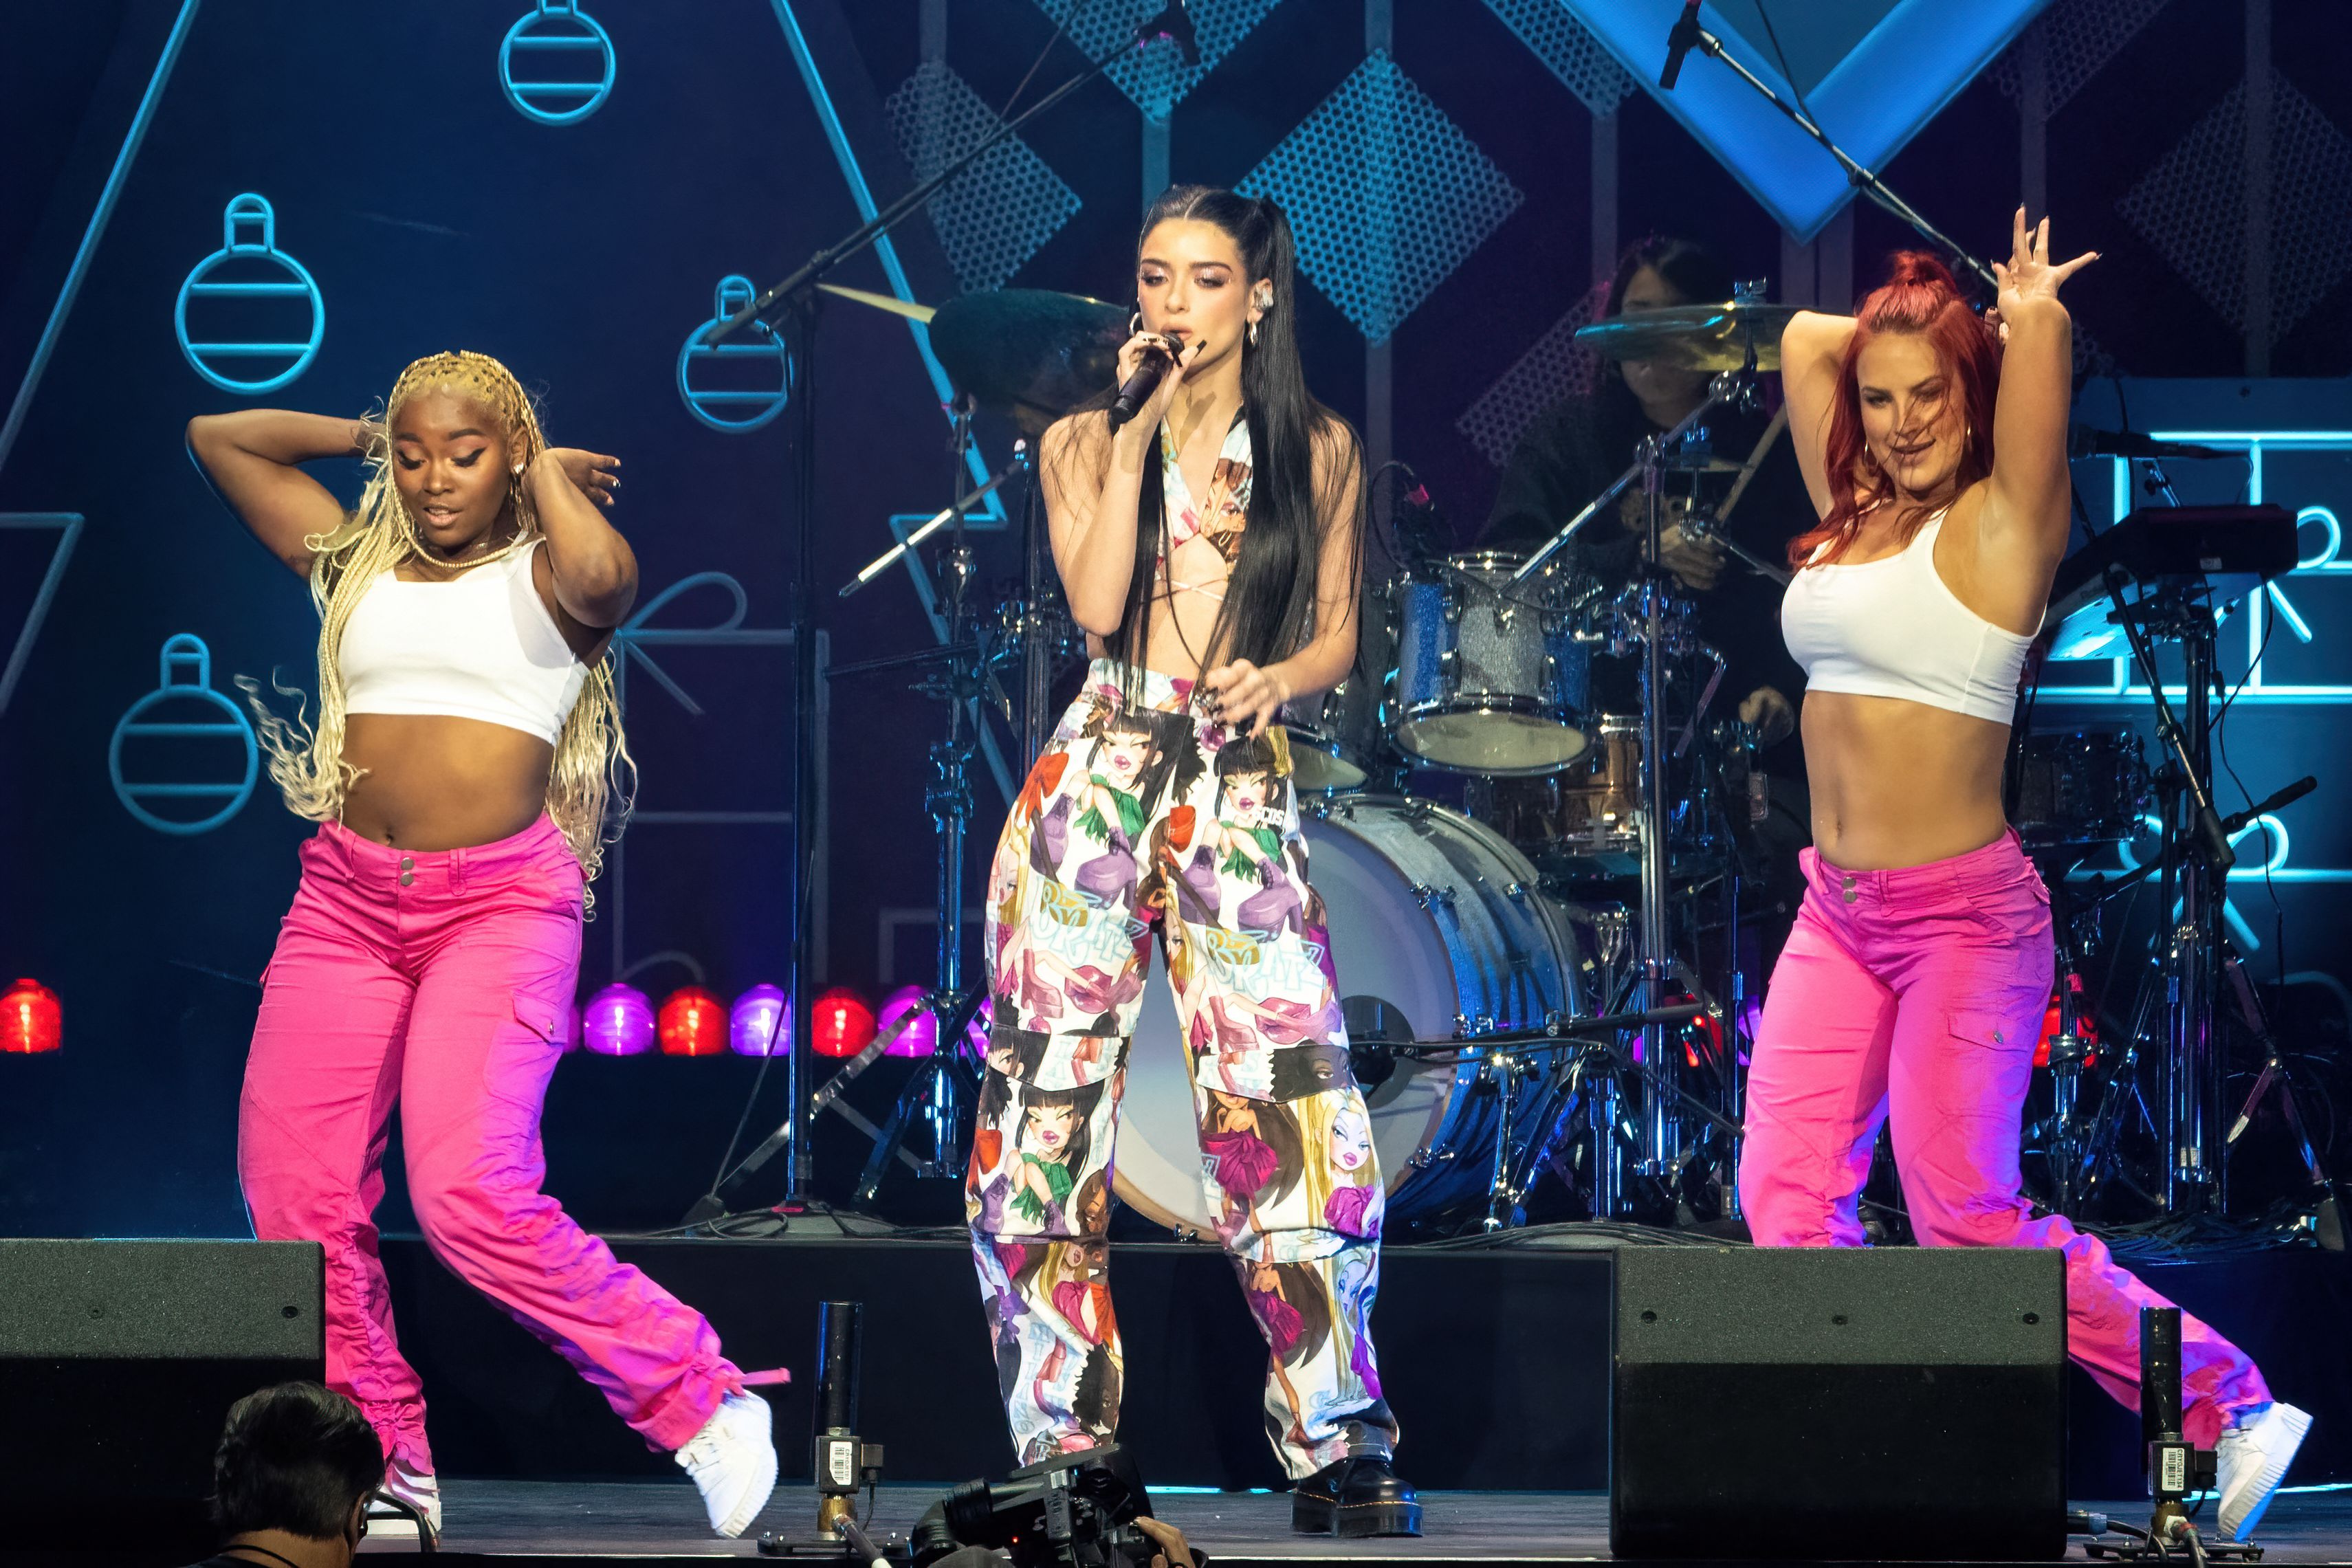 Dixie D'Amelio performs in concert during iHeartRadio 106.1 KISS FM's Jingle Ball 2021 with colorful pants and two backup dancers